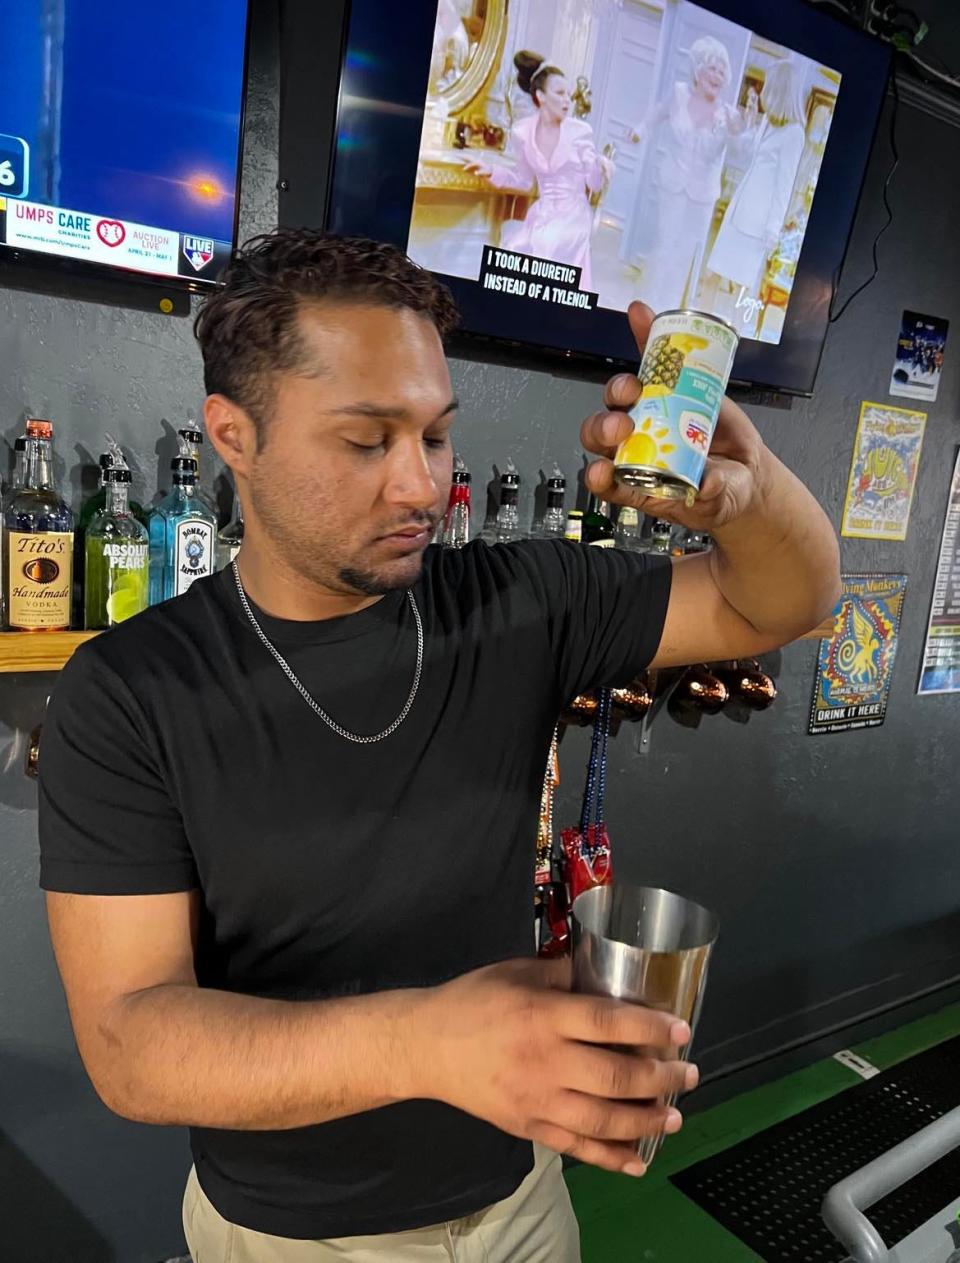 Jamal Gomez, of Gridiron Pizza & Sports Bar, said his passion is concocting new drinks and making customers happy.